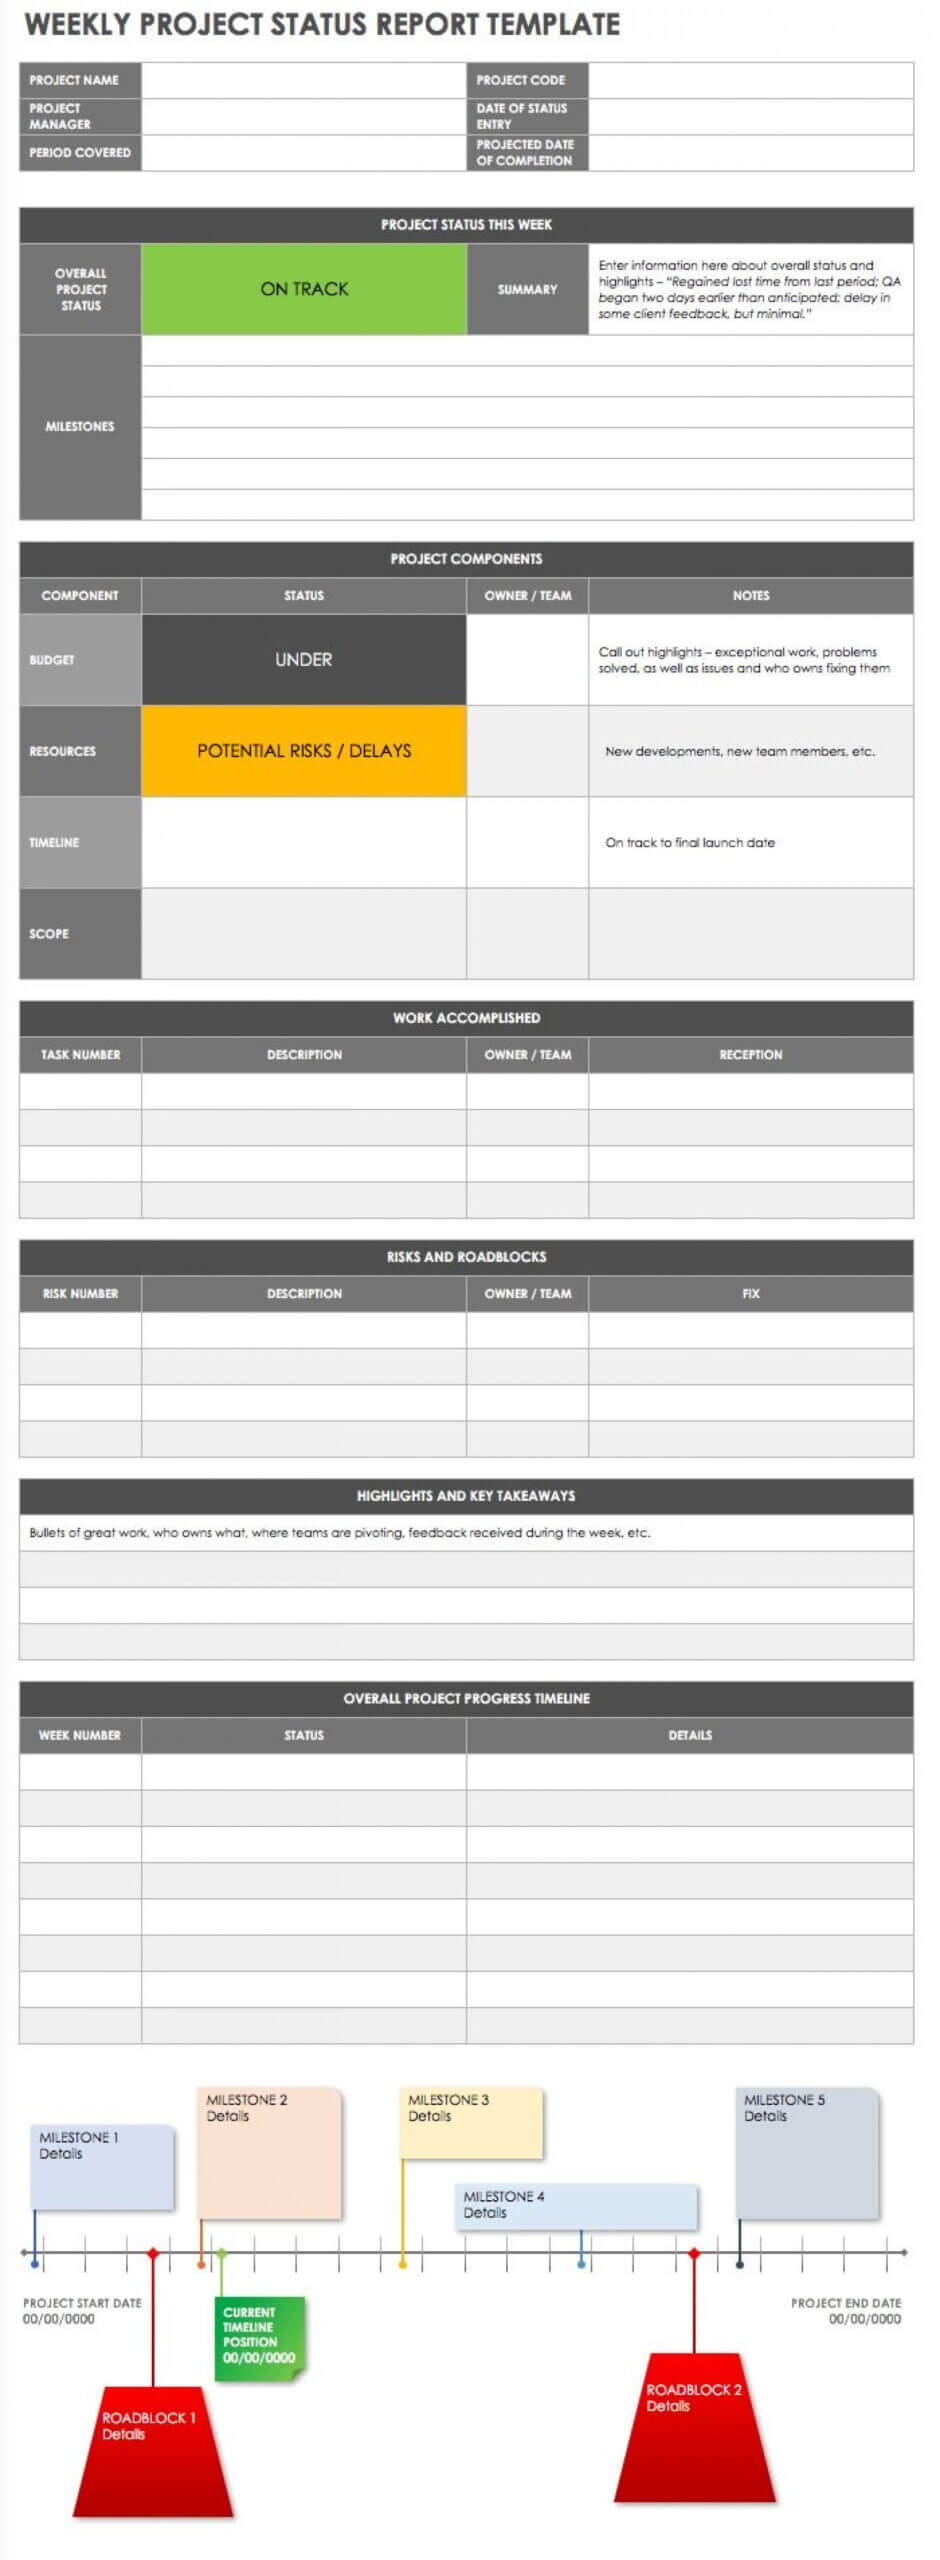 036 Weekly Status Report Template Impressive Ideas Google Within Project Weekly Status Report Template Ppt